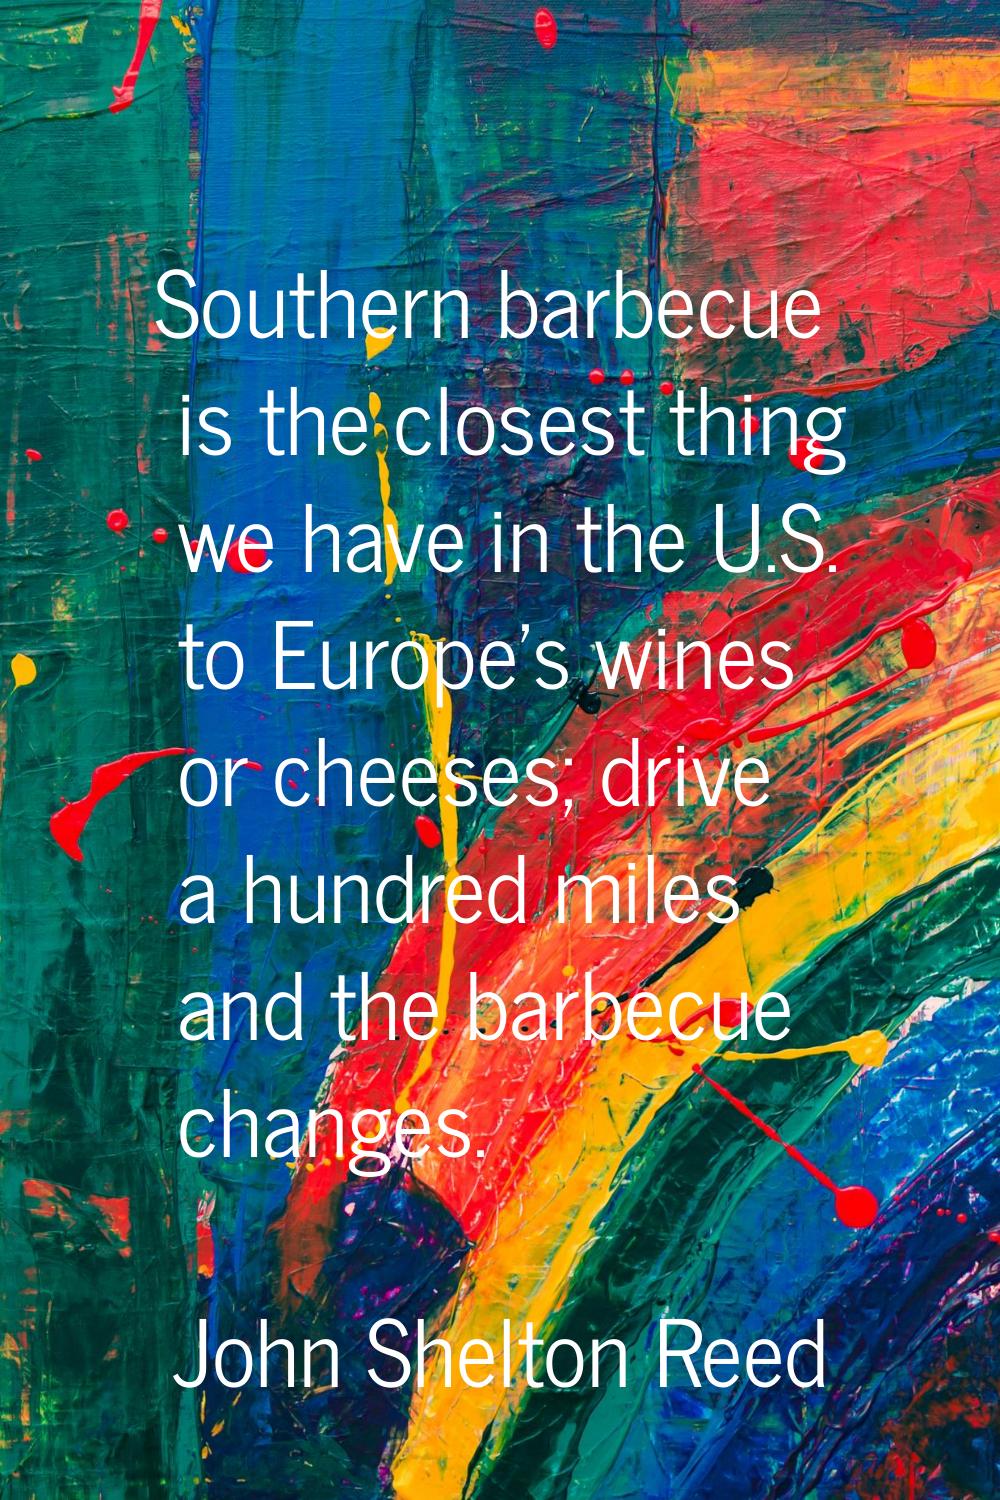 Southern barbecue is the closest thing we have in the U.S. to Europe's wines or cheeses; drive a hu